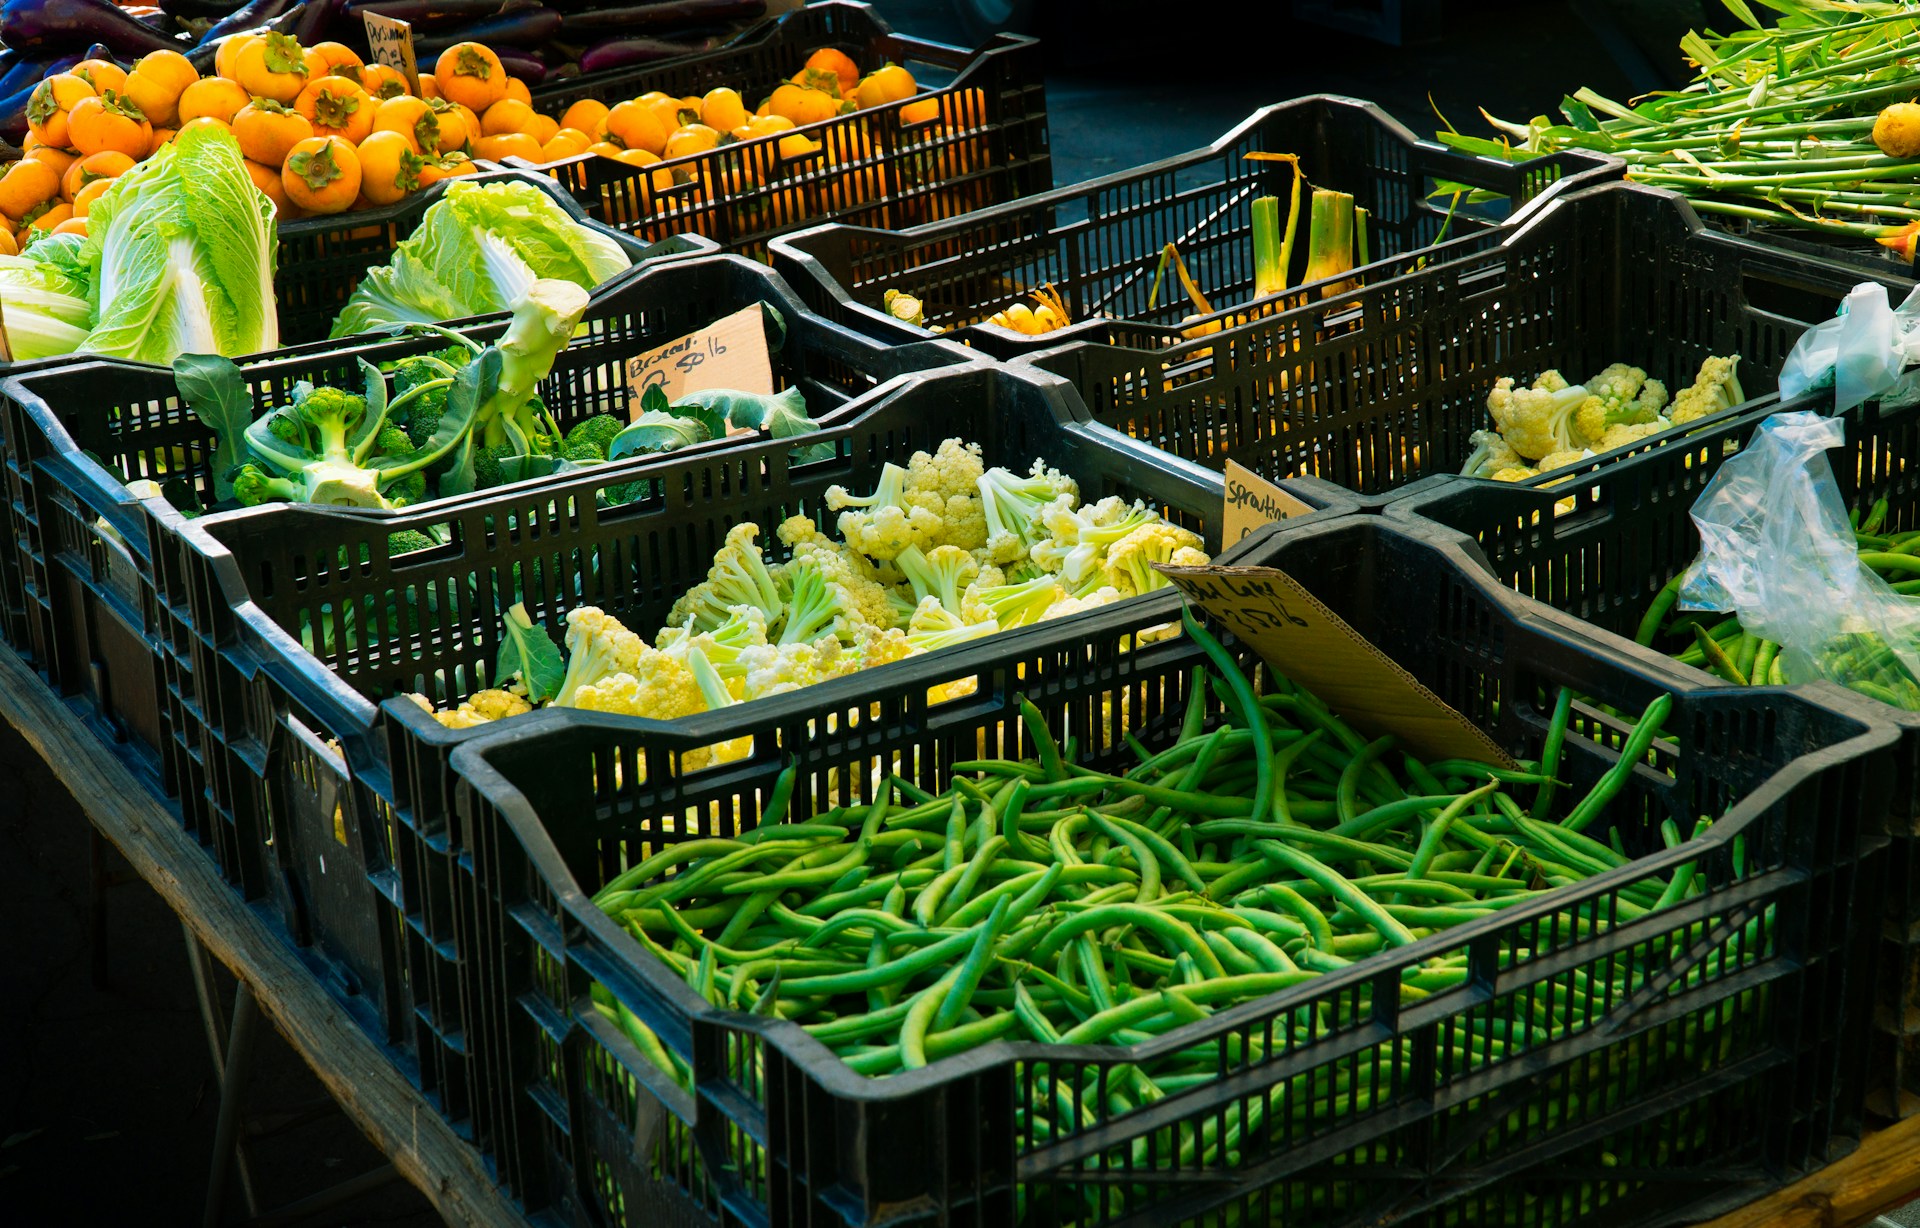 5 Inventory Optimization Tips for Produce Distribution